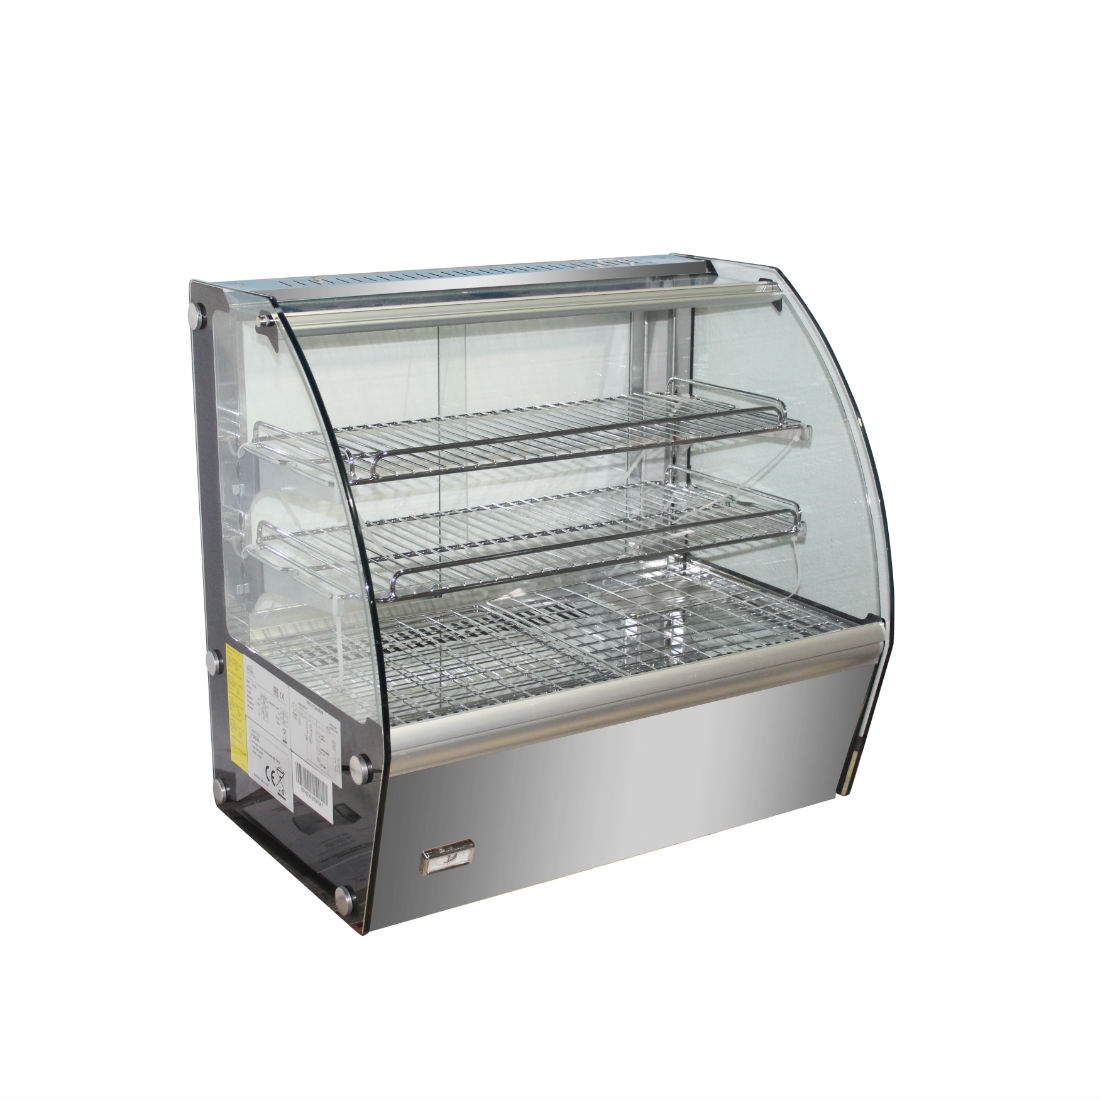 HTH120N - 120 litre Heated Counter-Top Food Display 